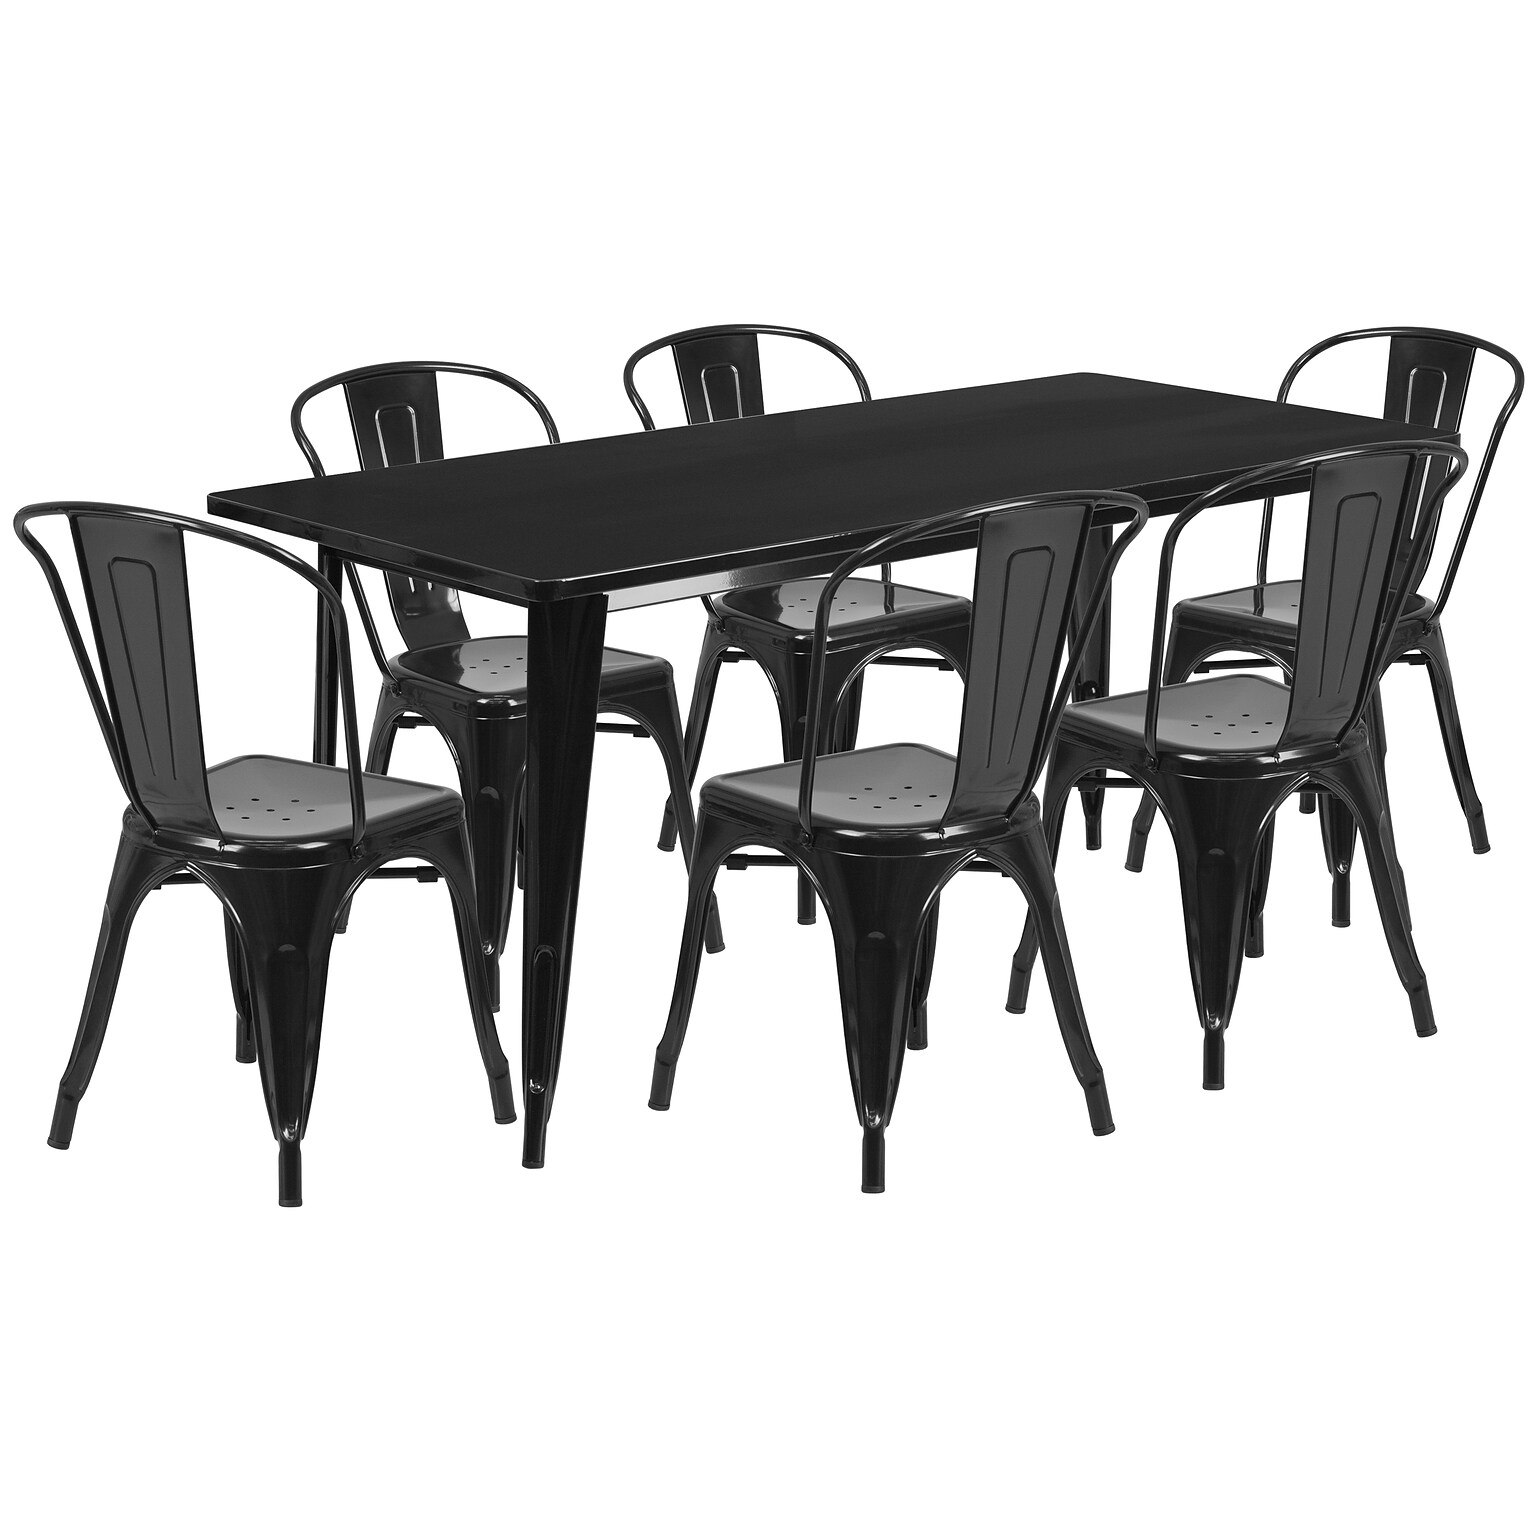 Flash Furniture Gilbert Indoor-Outdoor Table Set with 6 Stack Chairs, 63 x 31.5, Black (ETCT005630BK)